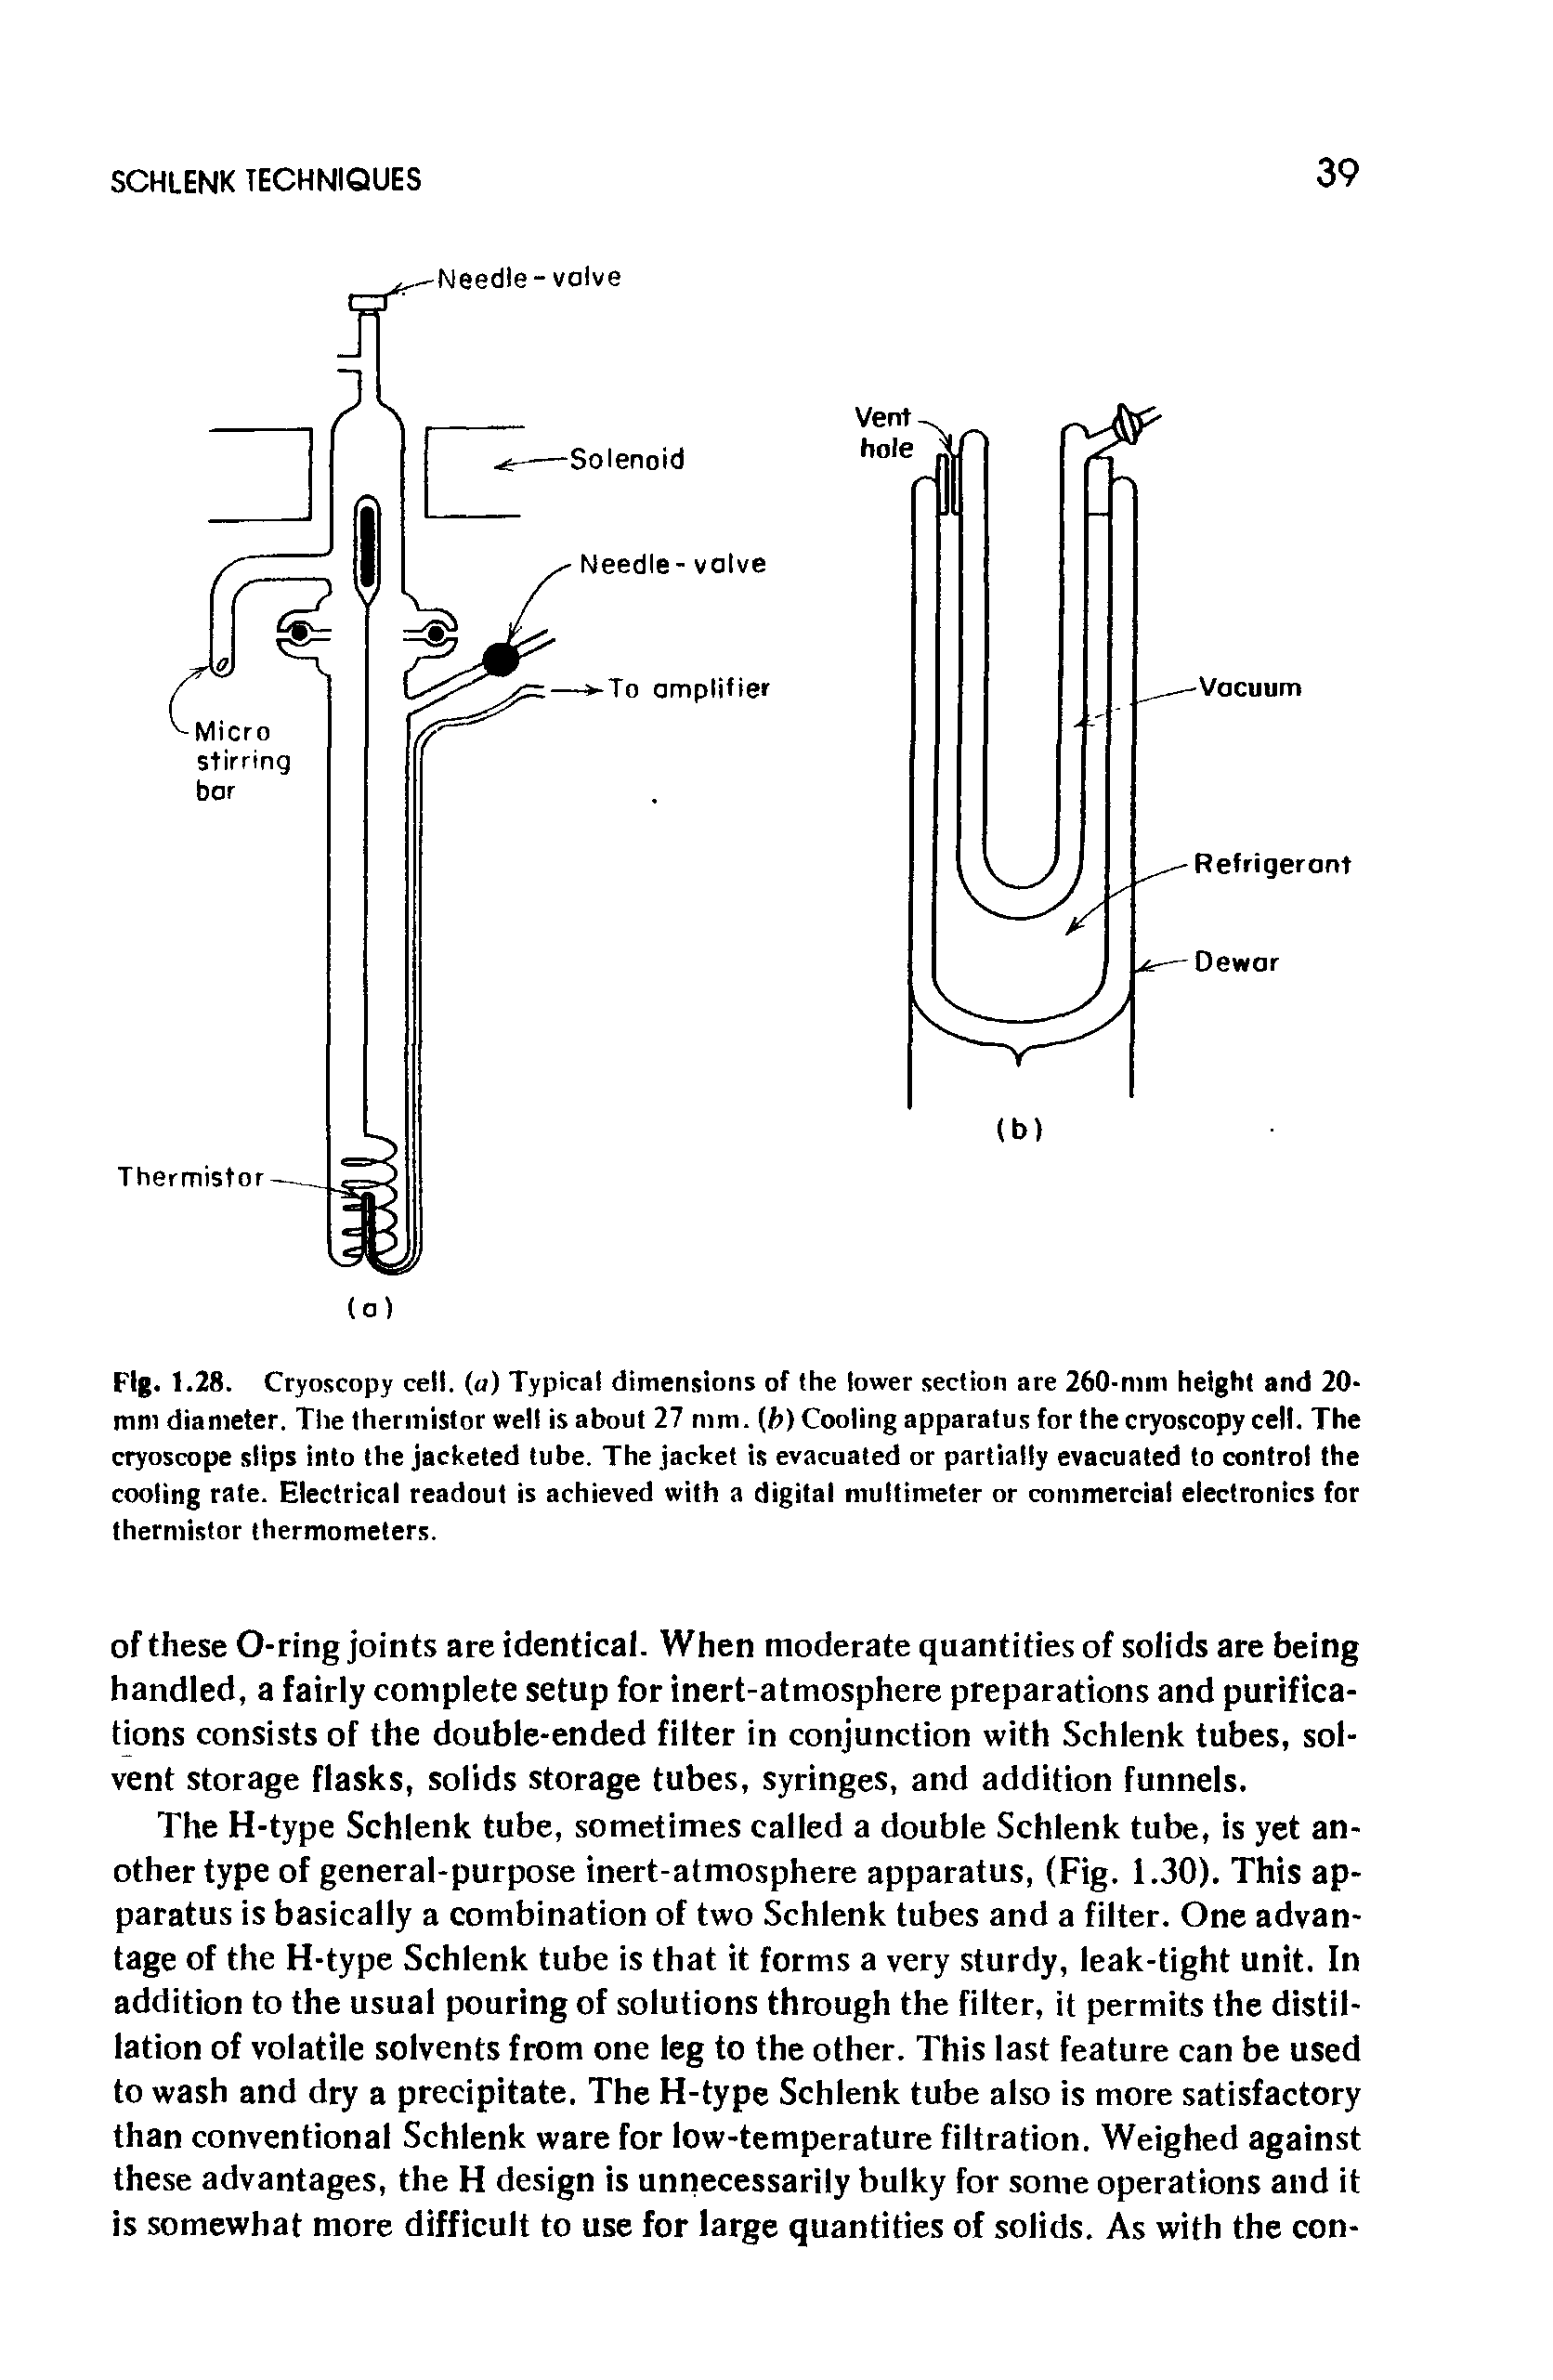 Fig. 1.28. Cryoscopy cell, (a) Typical dimensions of the lower section are 260-mm height and 20-mm diameter. The thermistor well is about 27 mm. (b) Cooling apparatus for the cryoscopy cell. The cryoscope slips into the jacketed tube. The jacket is evacuated or partially evacuated to control the cooling rate. Electrical readout is achieved with a digital multimeter or commercial electronics for thermistor thermometers.